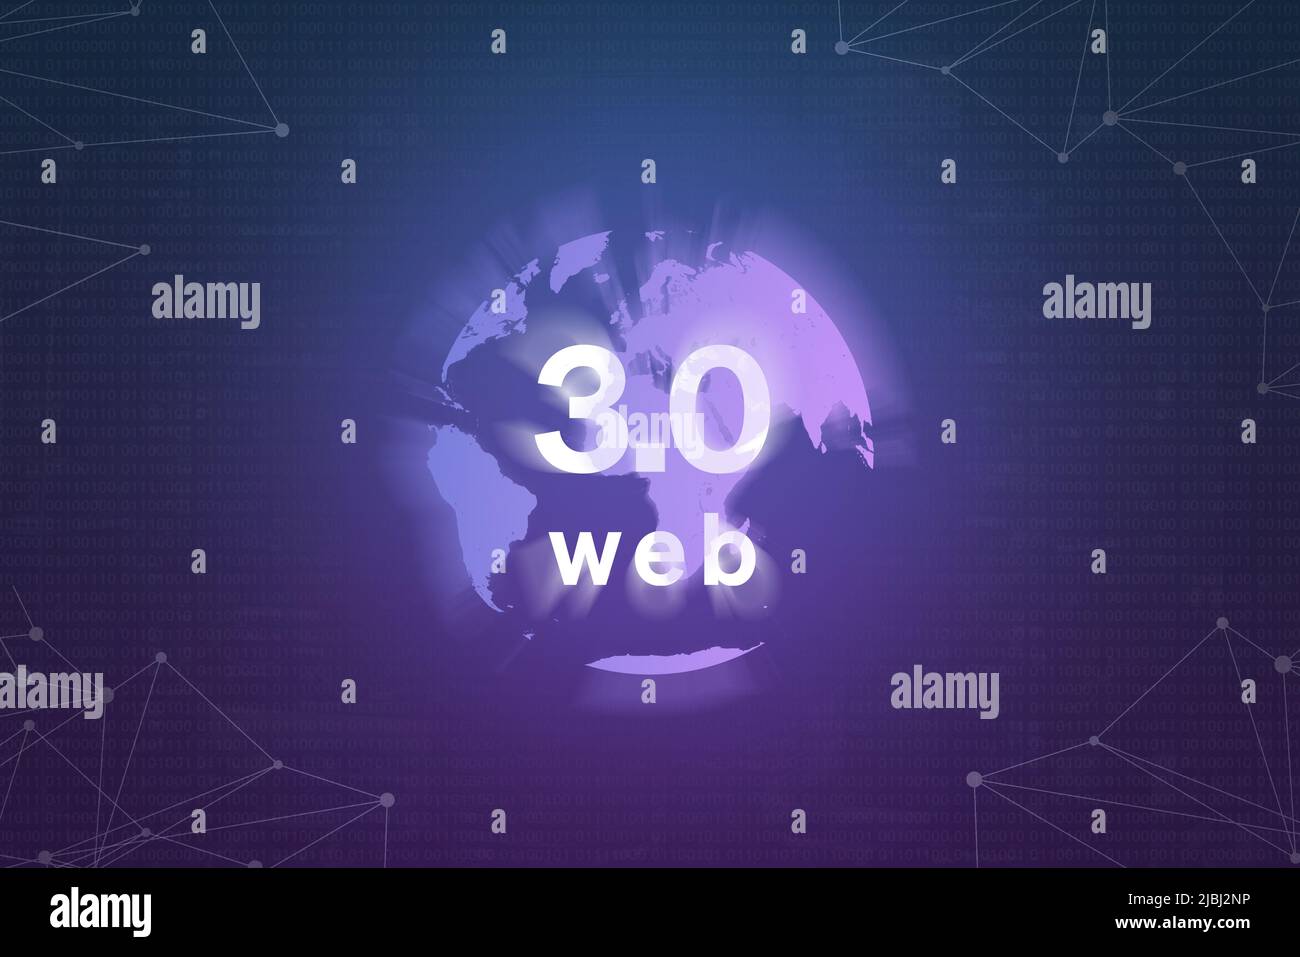 World wide web 3.0 based on blockchain technology and earth concept illustration on purple background with network nodes Stock Photo